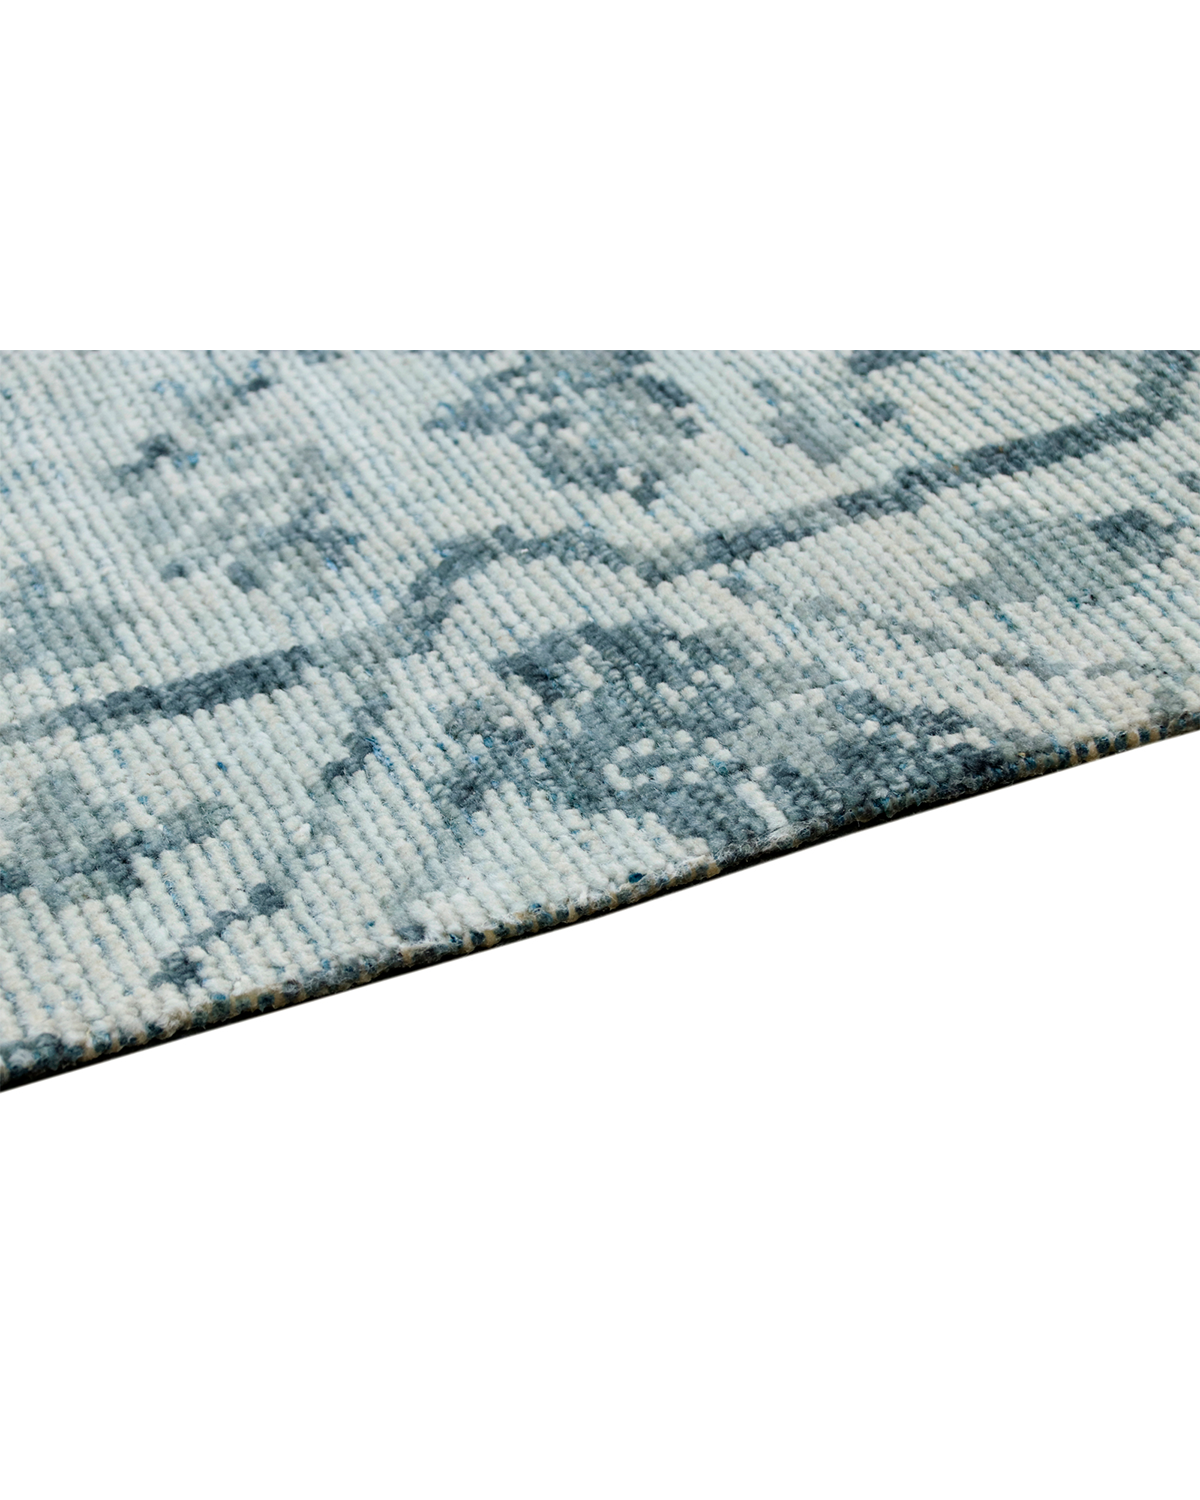 Hand-knotted Transitional Rug (S-95C)